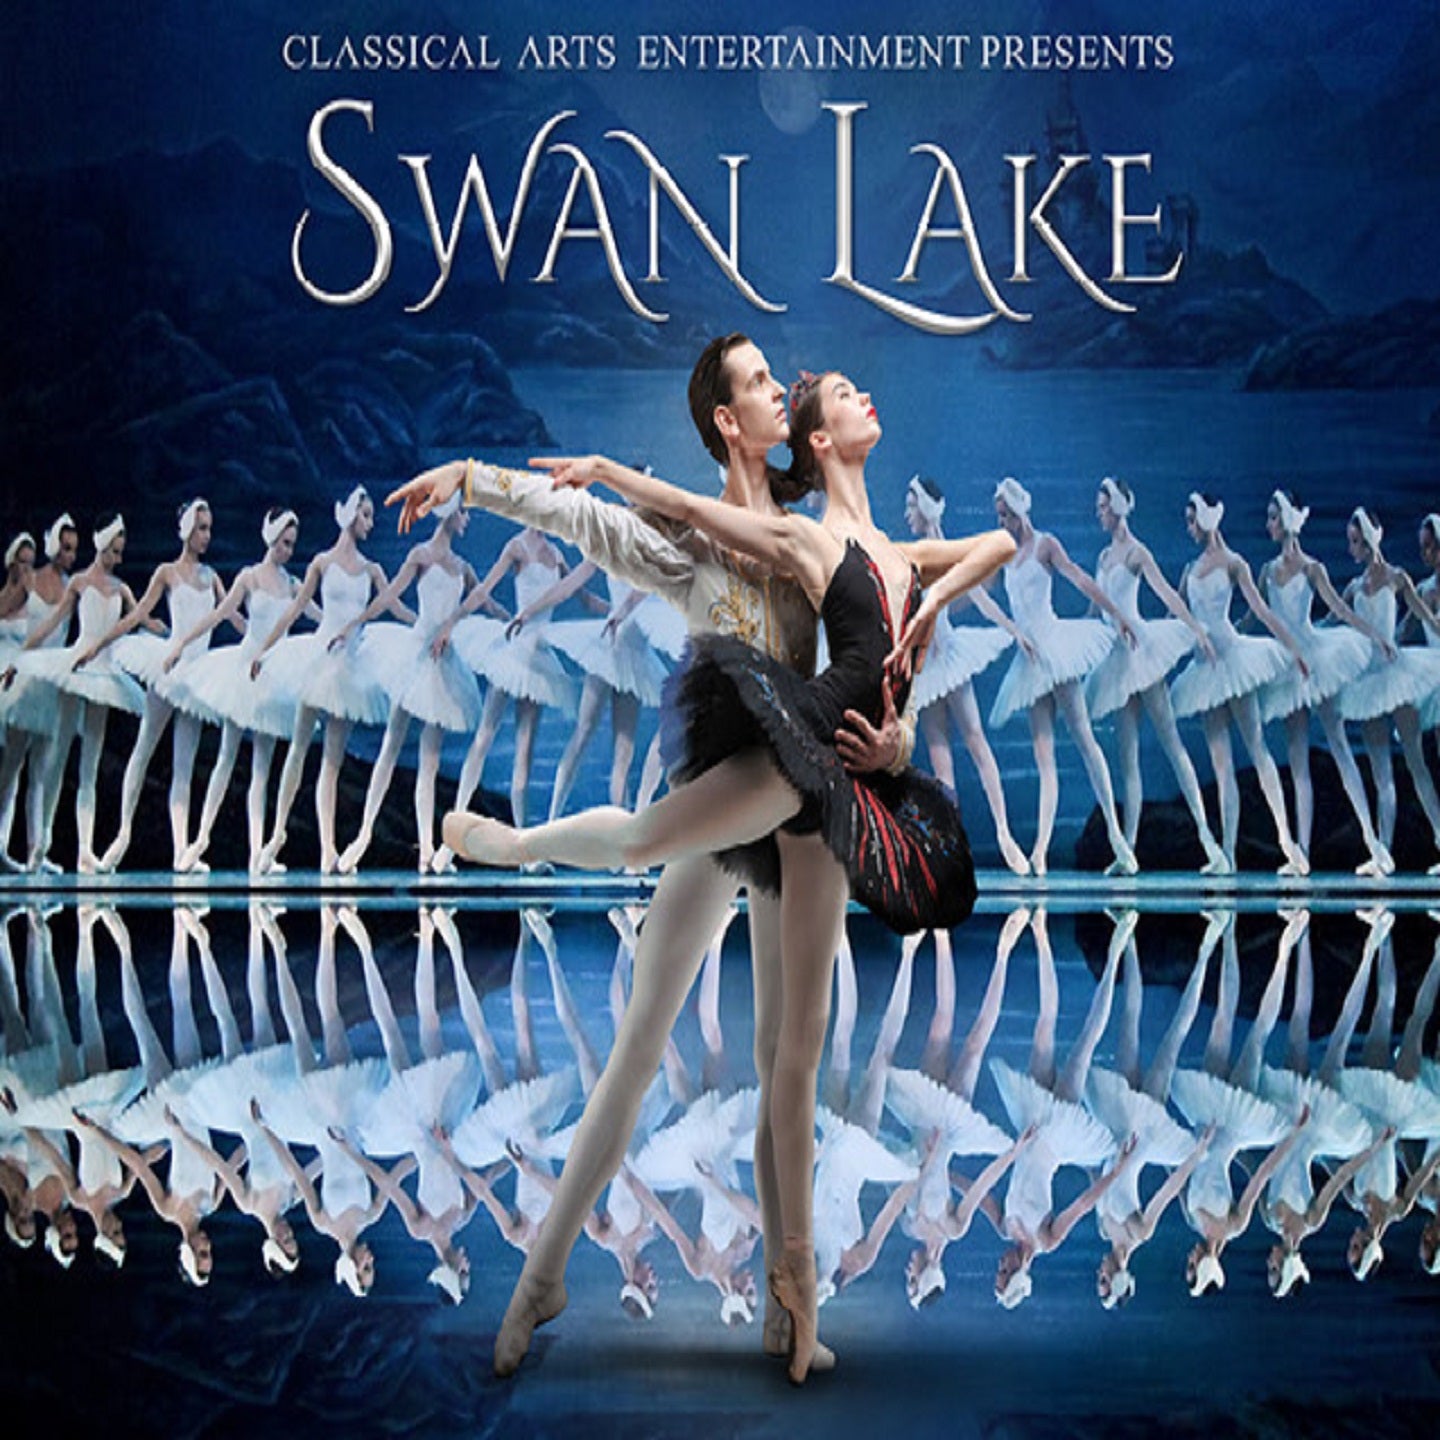 Swan Lake by the State Ballet Theatre of Ukraine